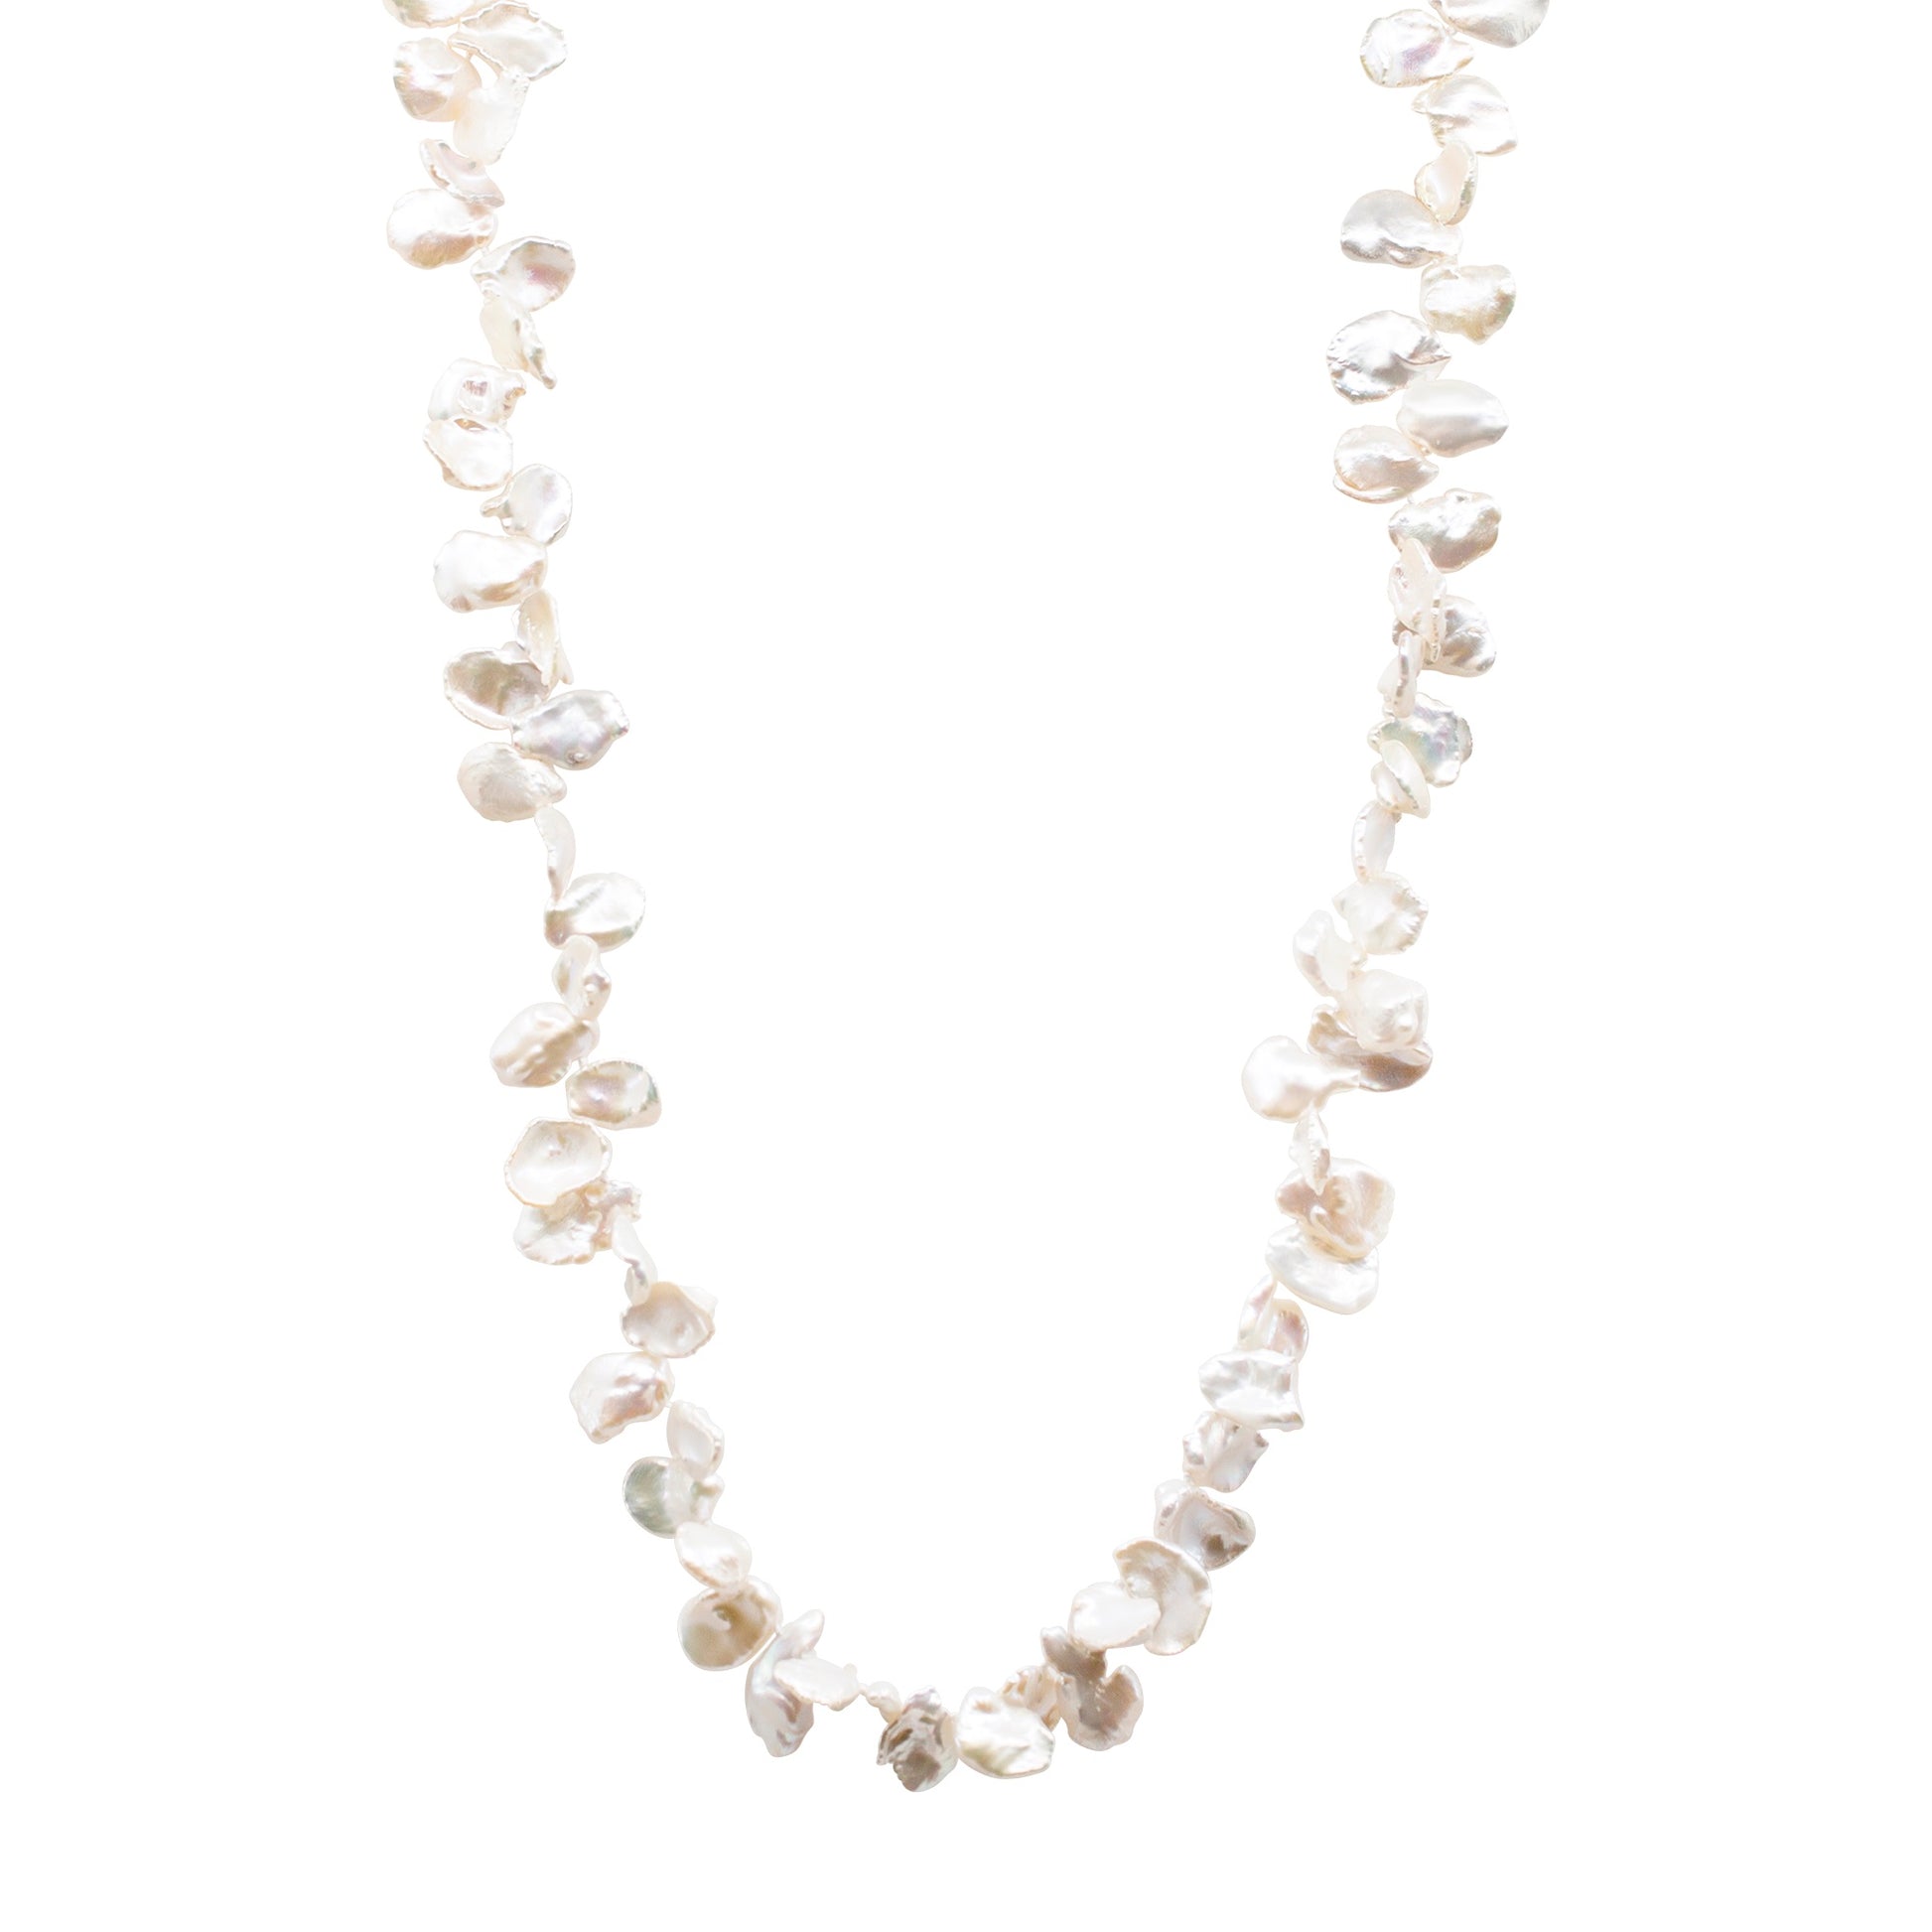 Anna - Keshi Pearl Necklace (White pearls)